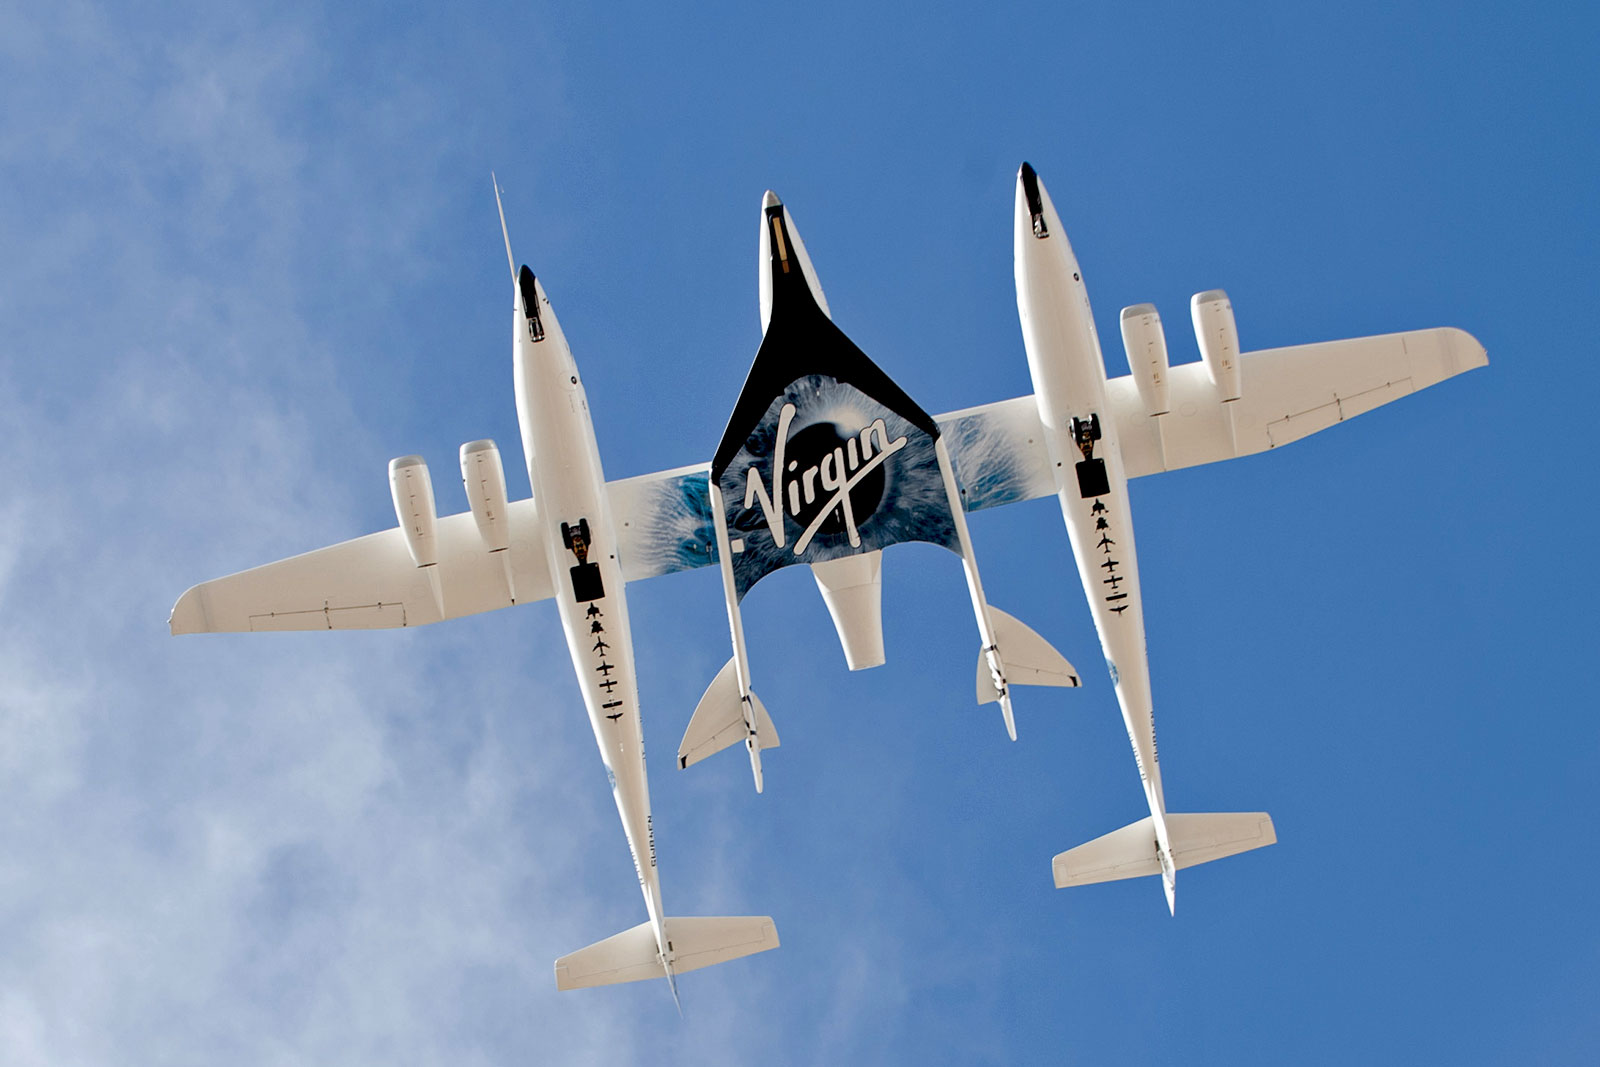 http://airpigz.squarespace.com/storage/hi-res/Virgin_Galactic_WK2_SS2_From_Underneath.jpg